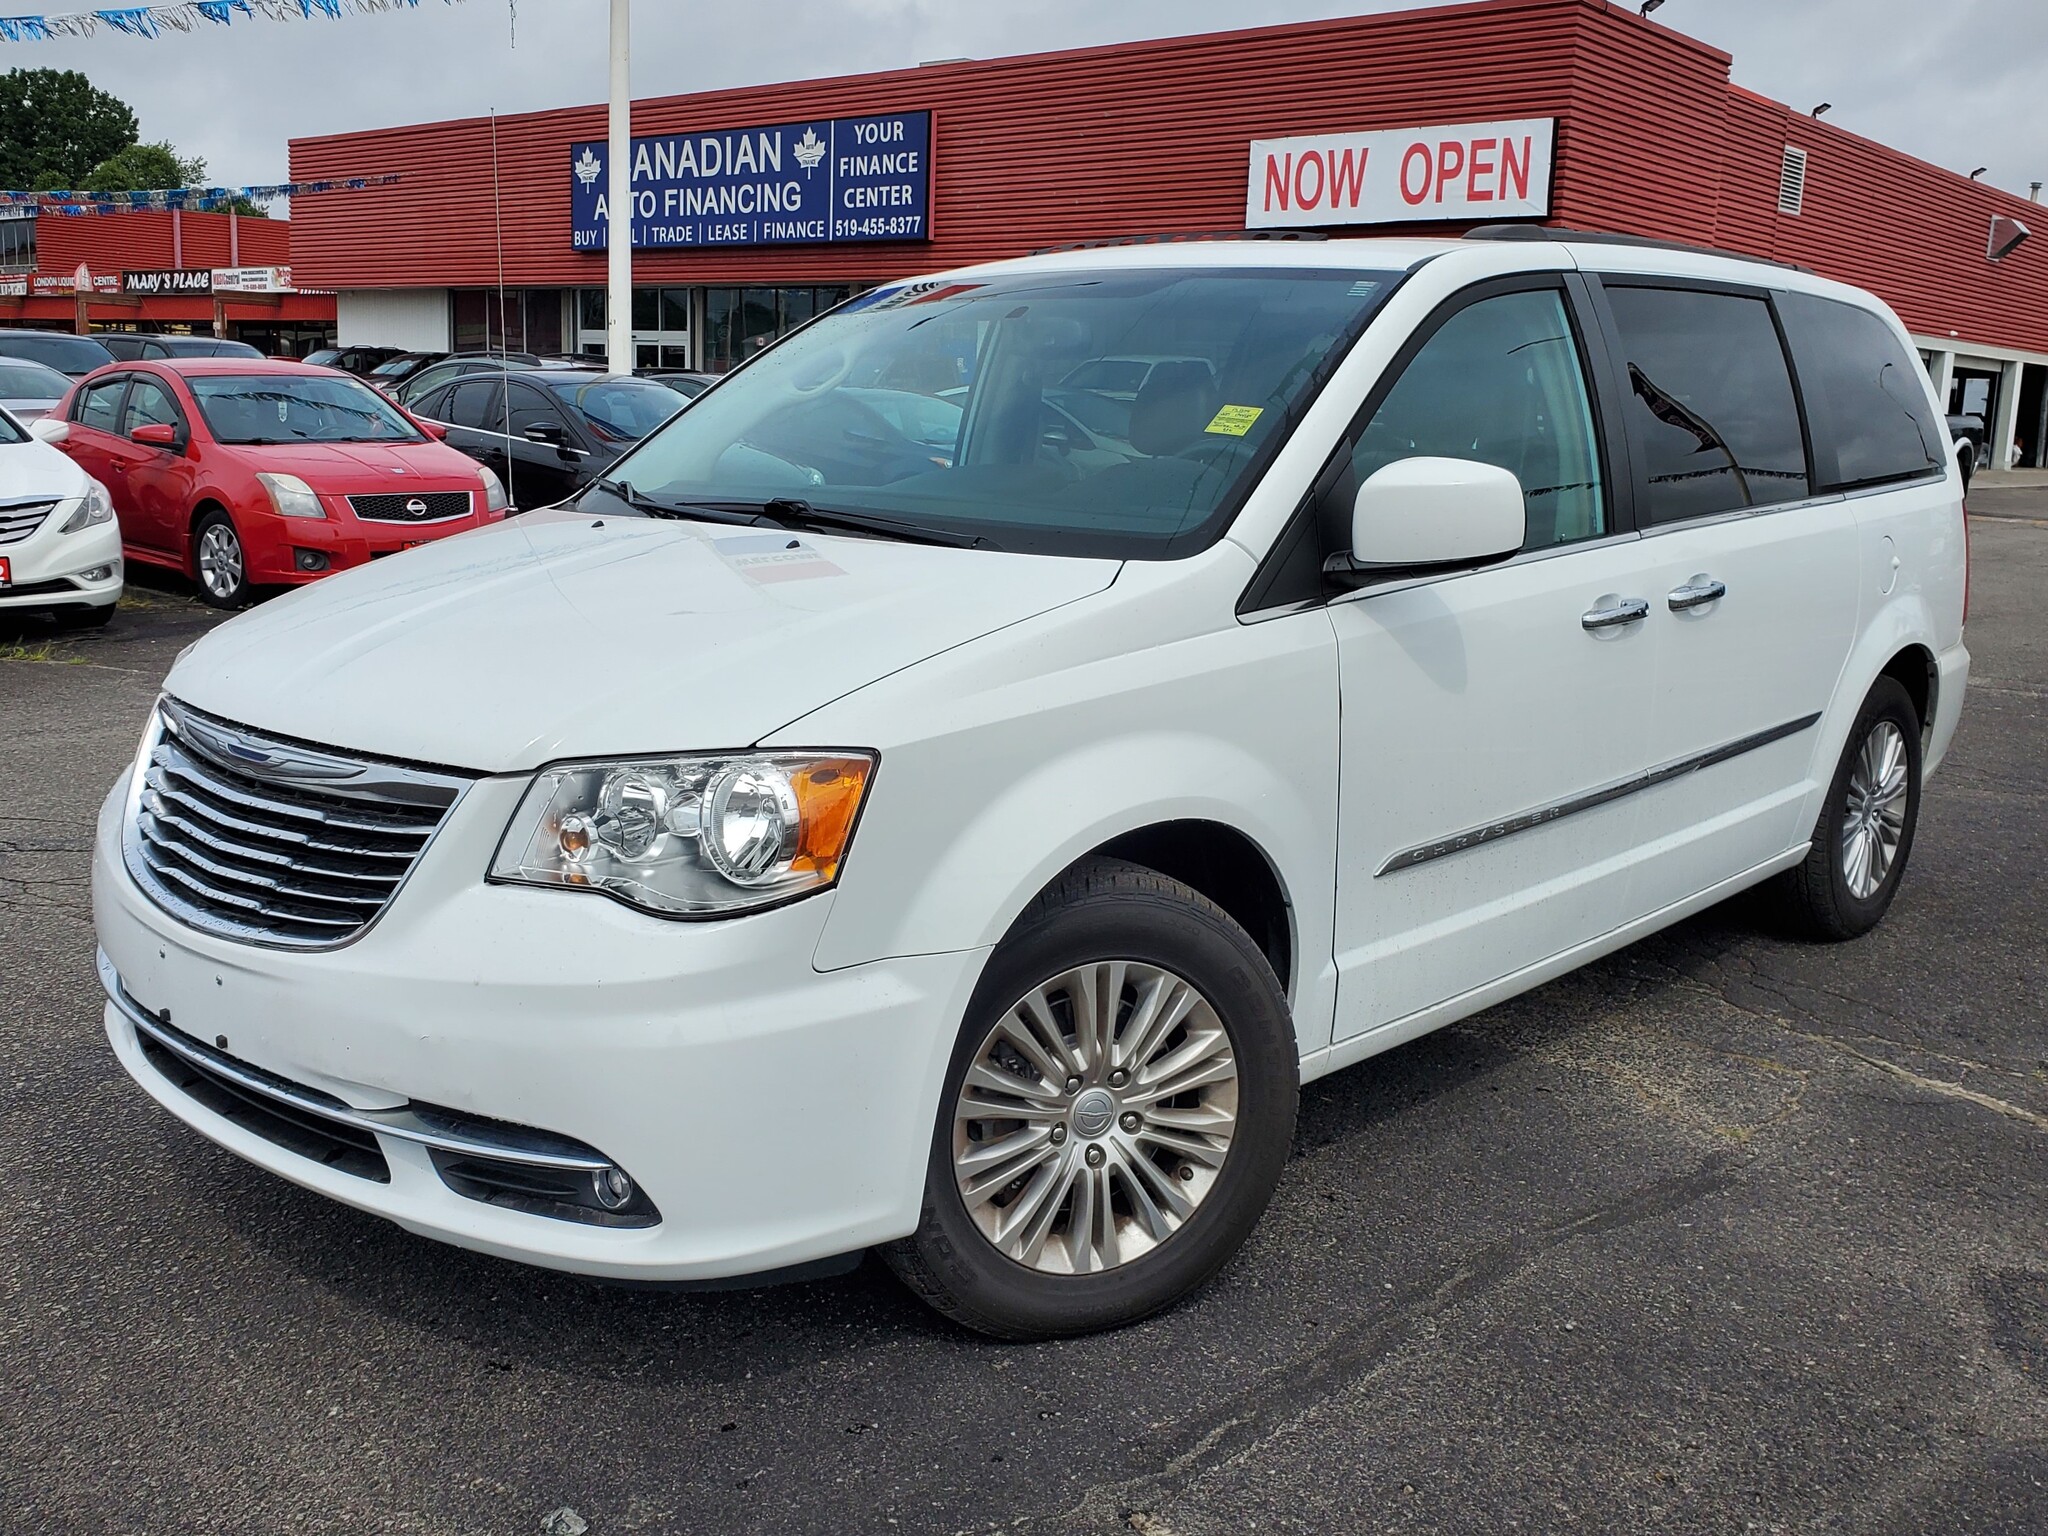 2015 Chrysler Town & Country in London, Ontario 5 Star